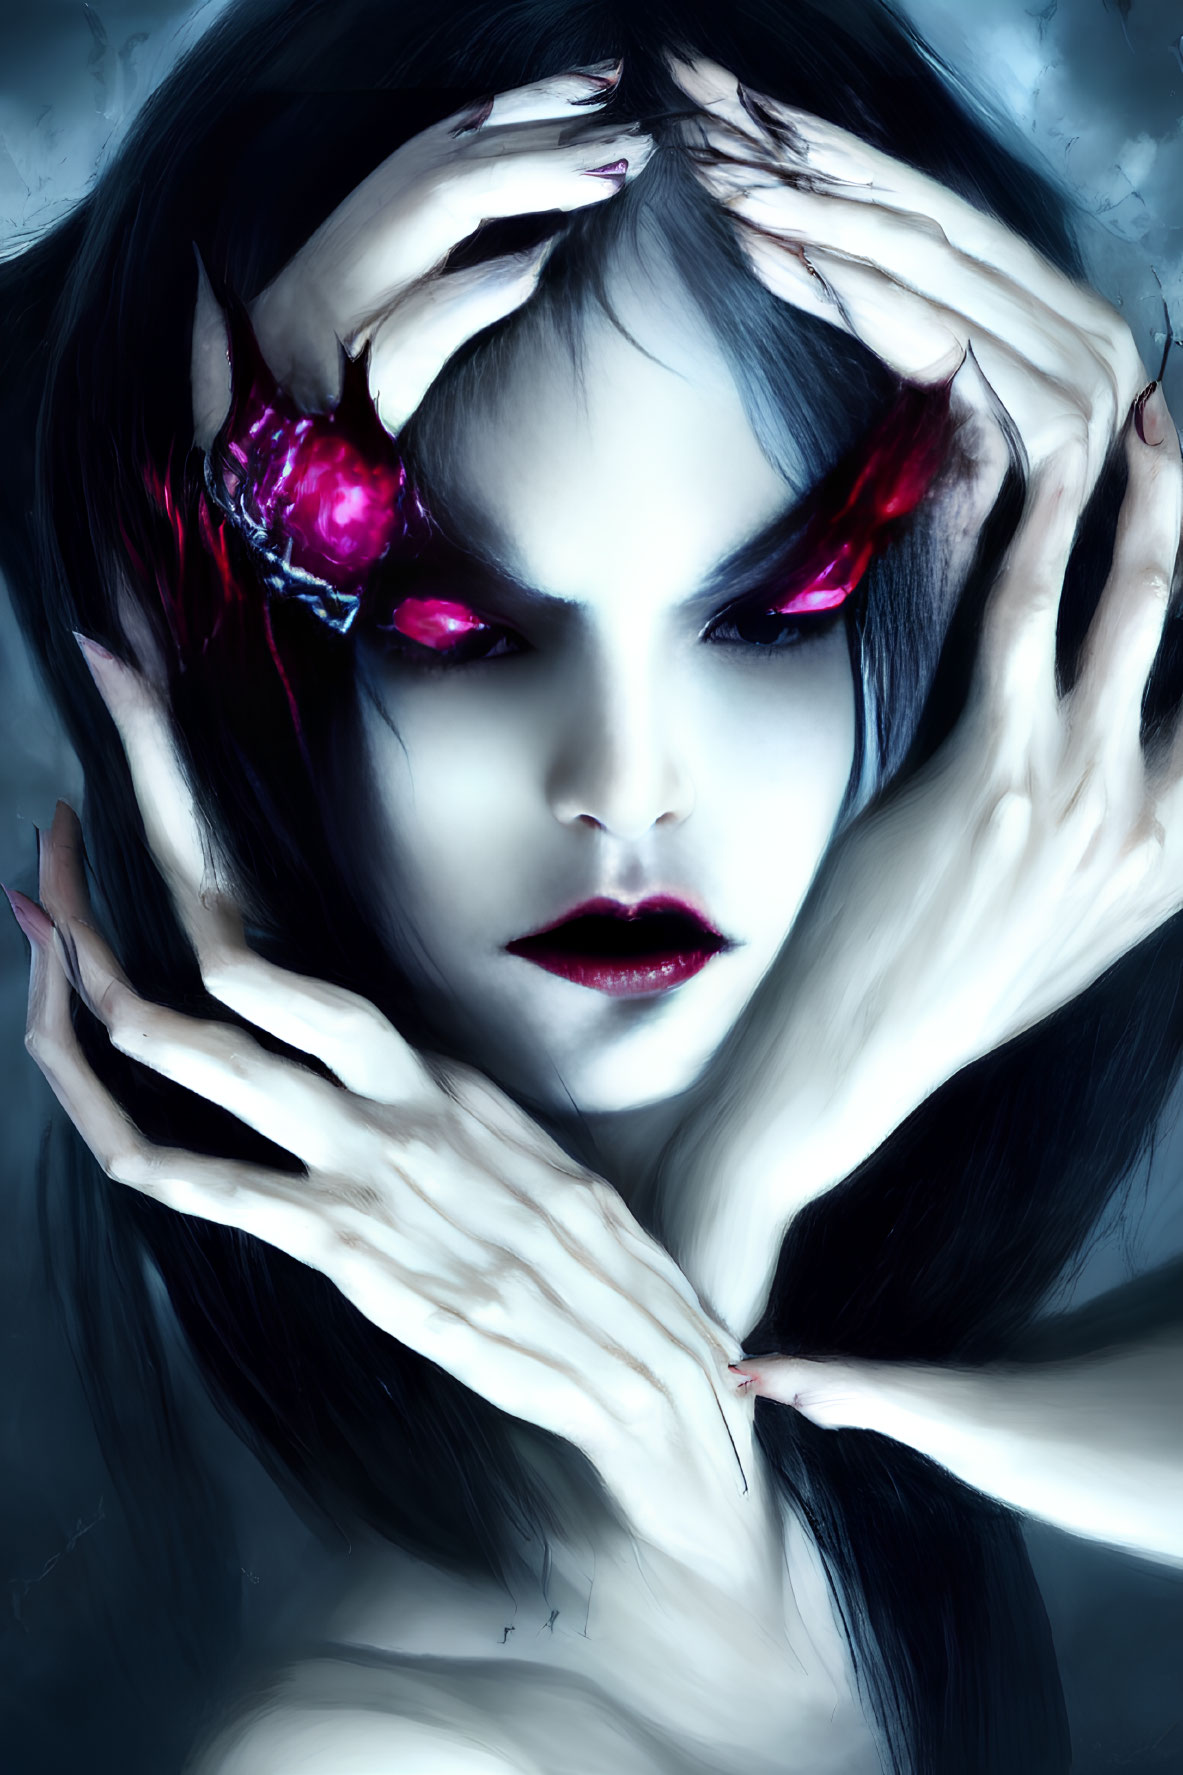 Eerie portrait of woman with red eyes and elongated fingers